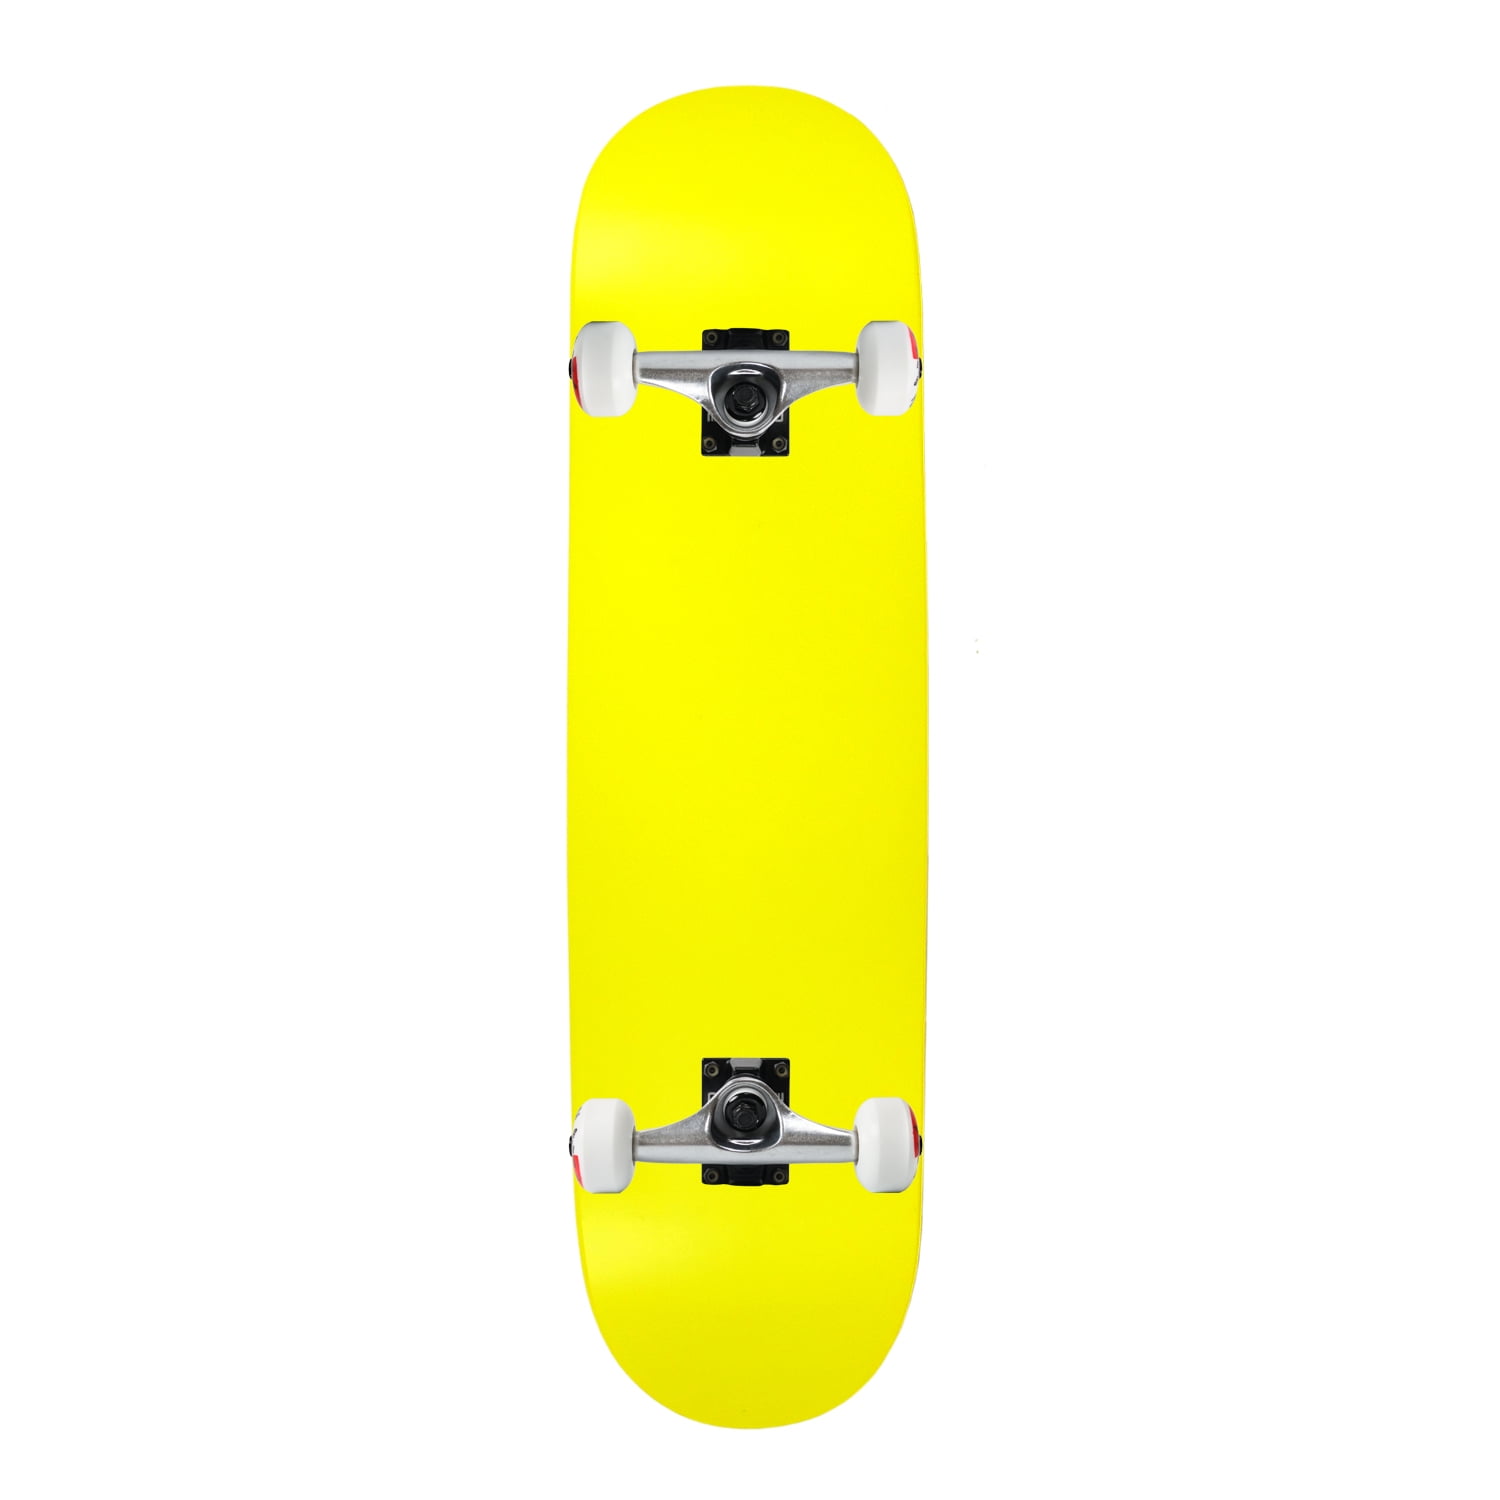 Moose Complete Skateboard NEON YELLOW 7.75" Black/White ASSEMBLED 